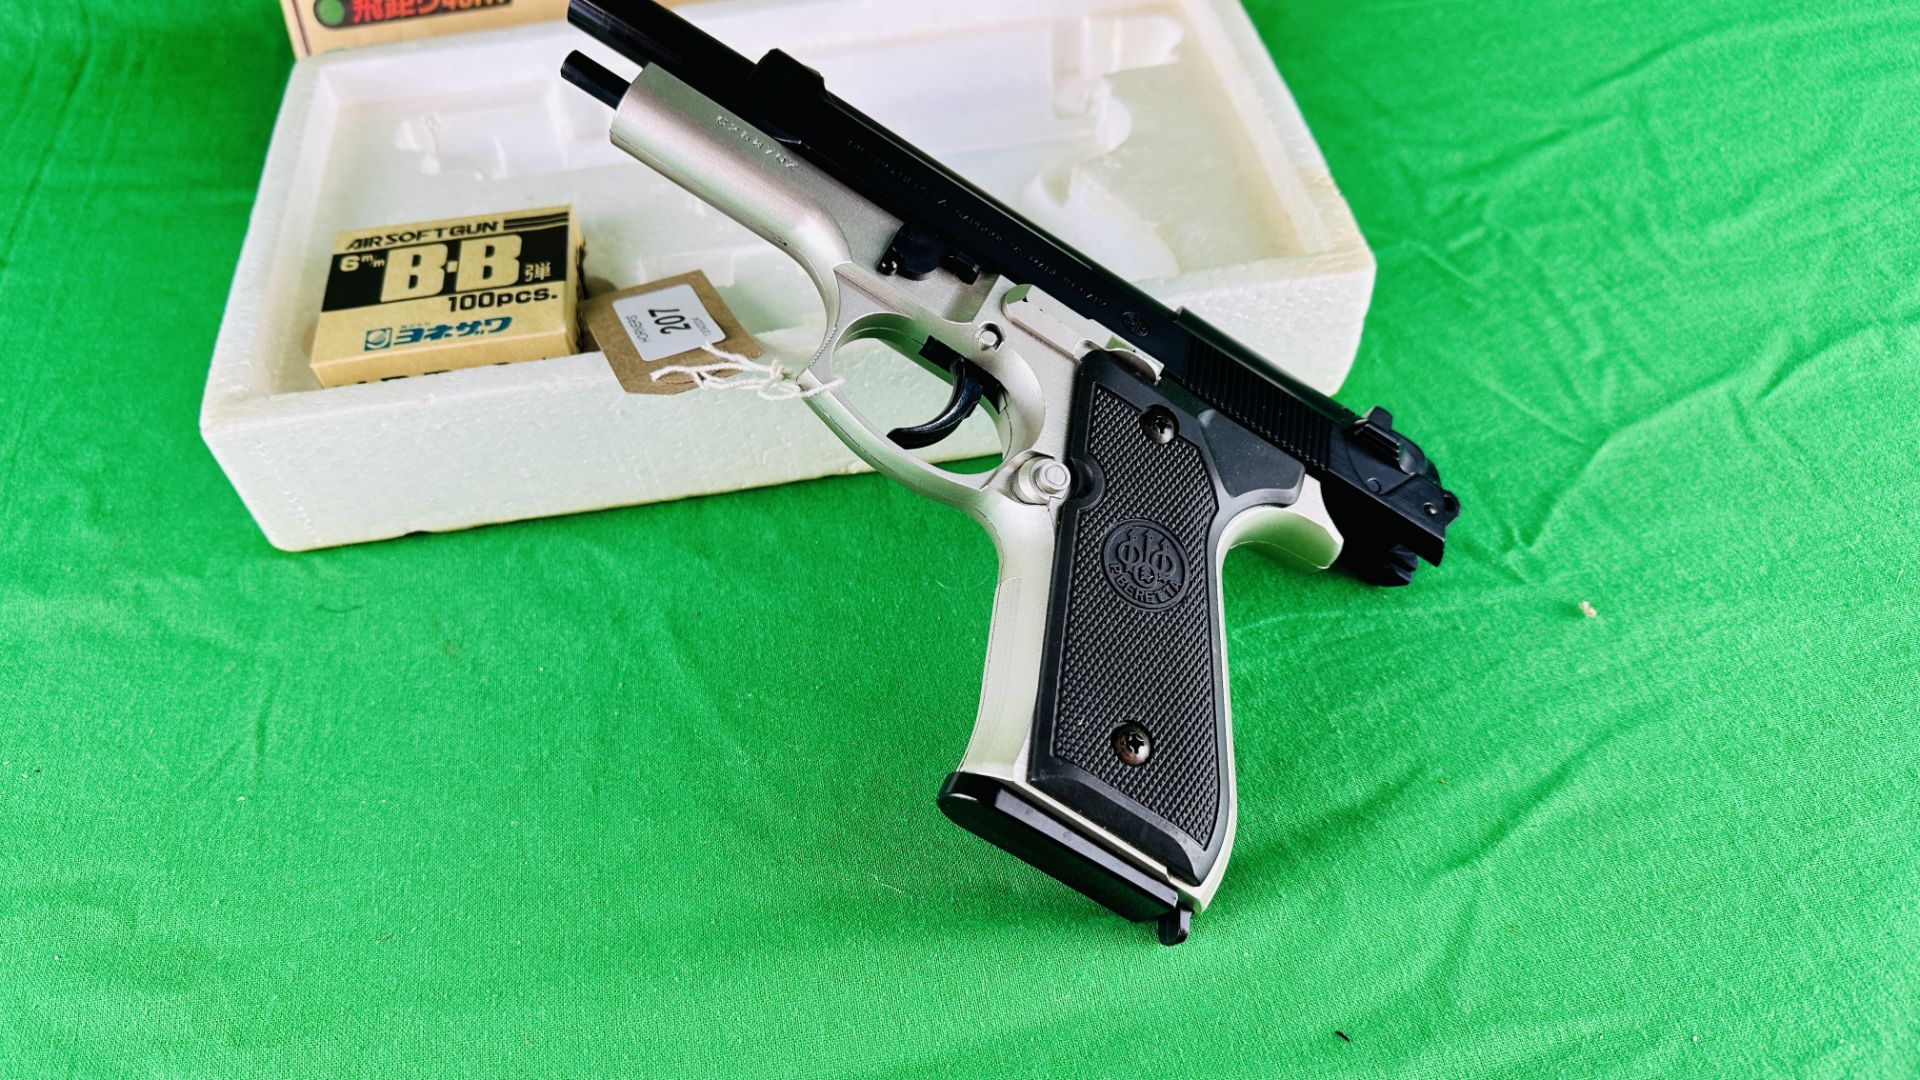 M92F BERETTA 40MM CASTON BB GUN IN ORIGINAL BOX - NO POSTAGE OR PACKING AVAILABLE. - Image 3 of 7